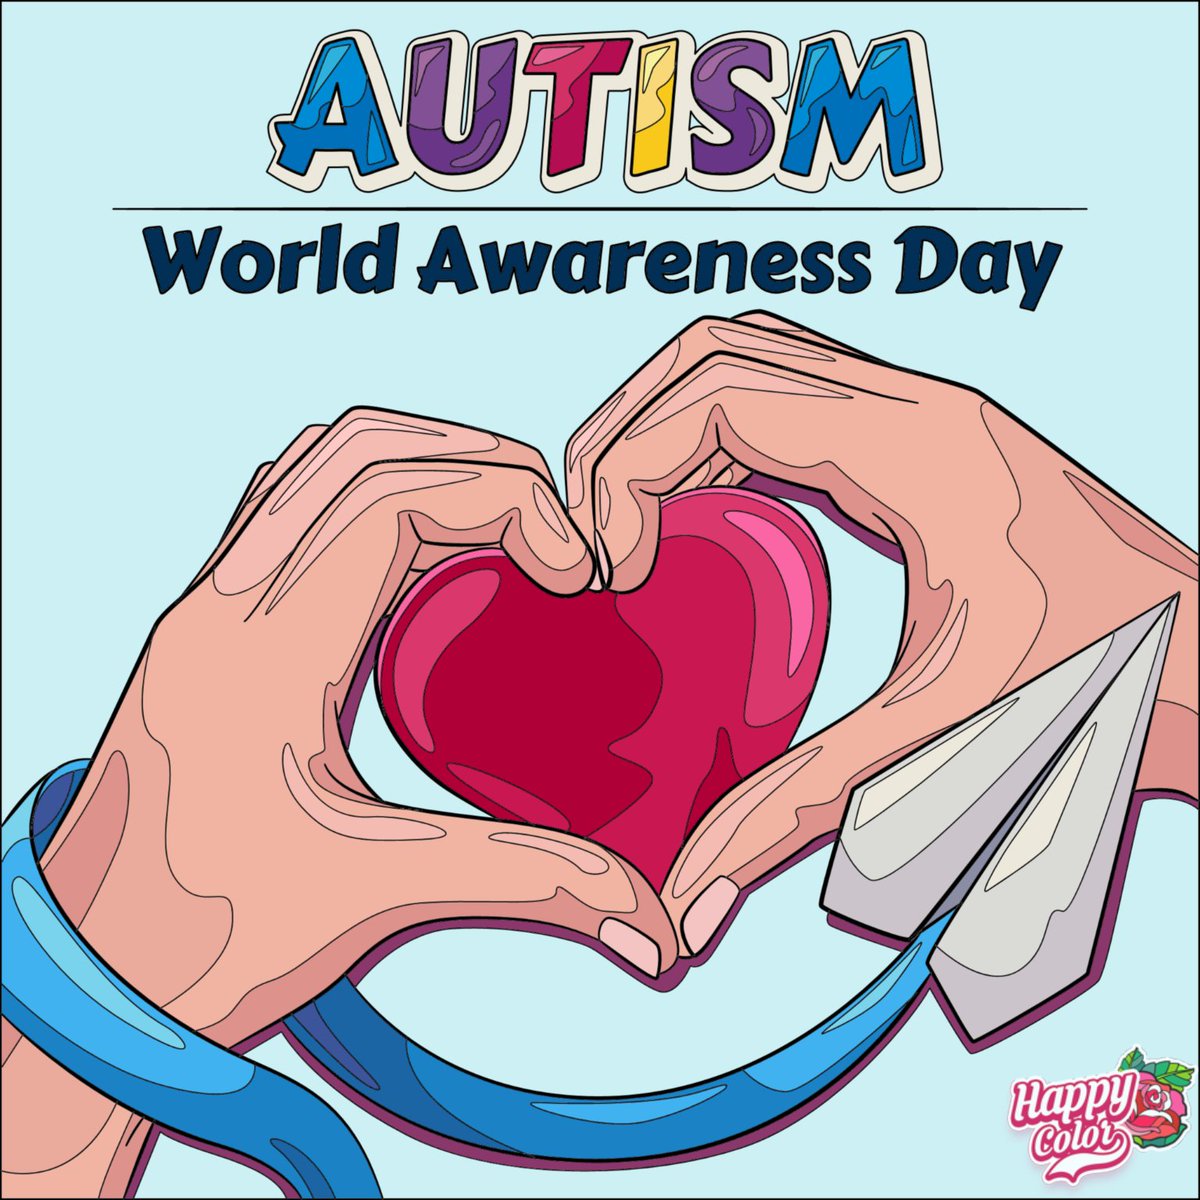 I know today isn't Autism Awareness Day, but it doesn't matter, everyday is important to educate yourself and be empathetic! https://t.co/I5LtvDoTjI